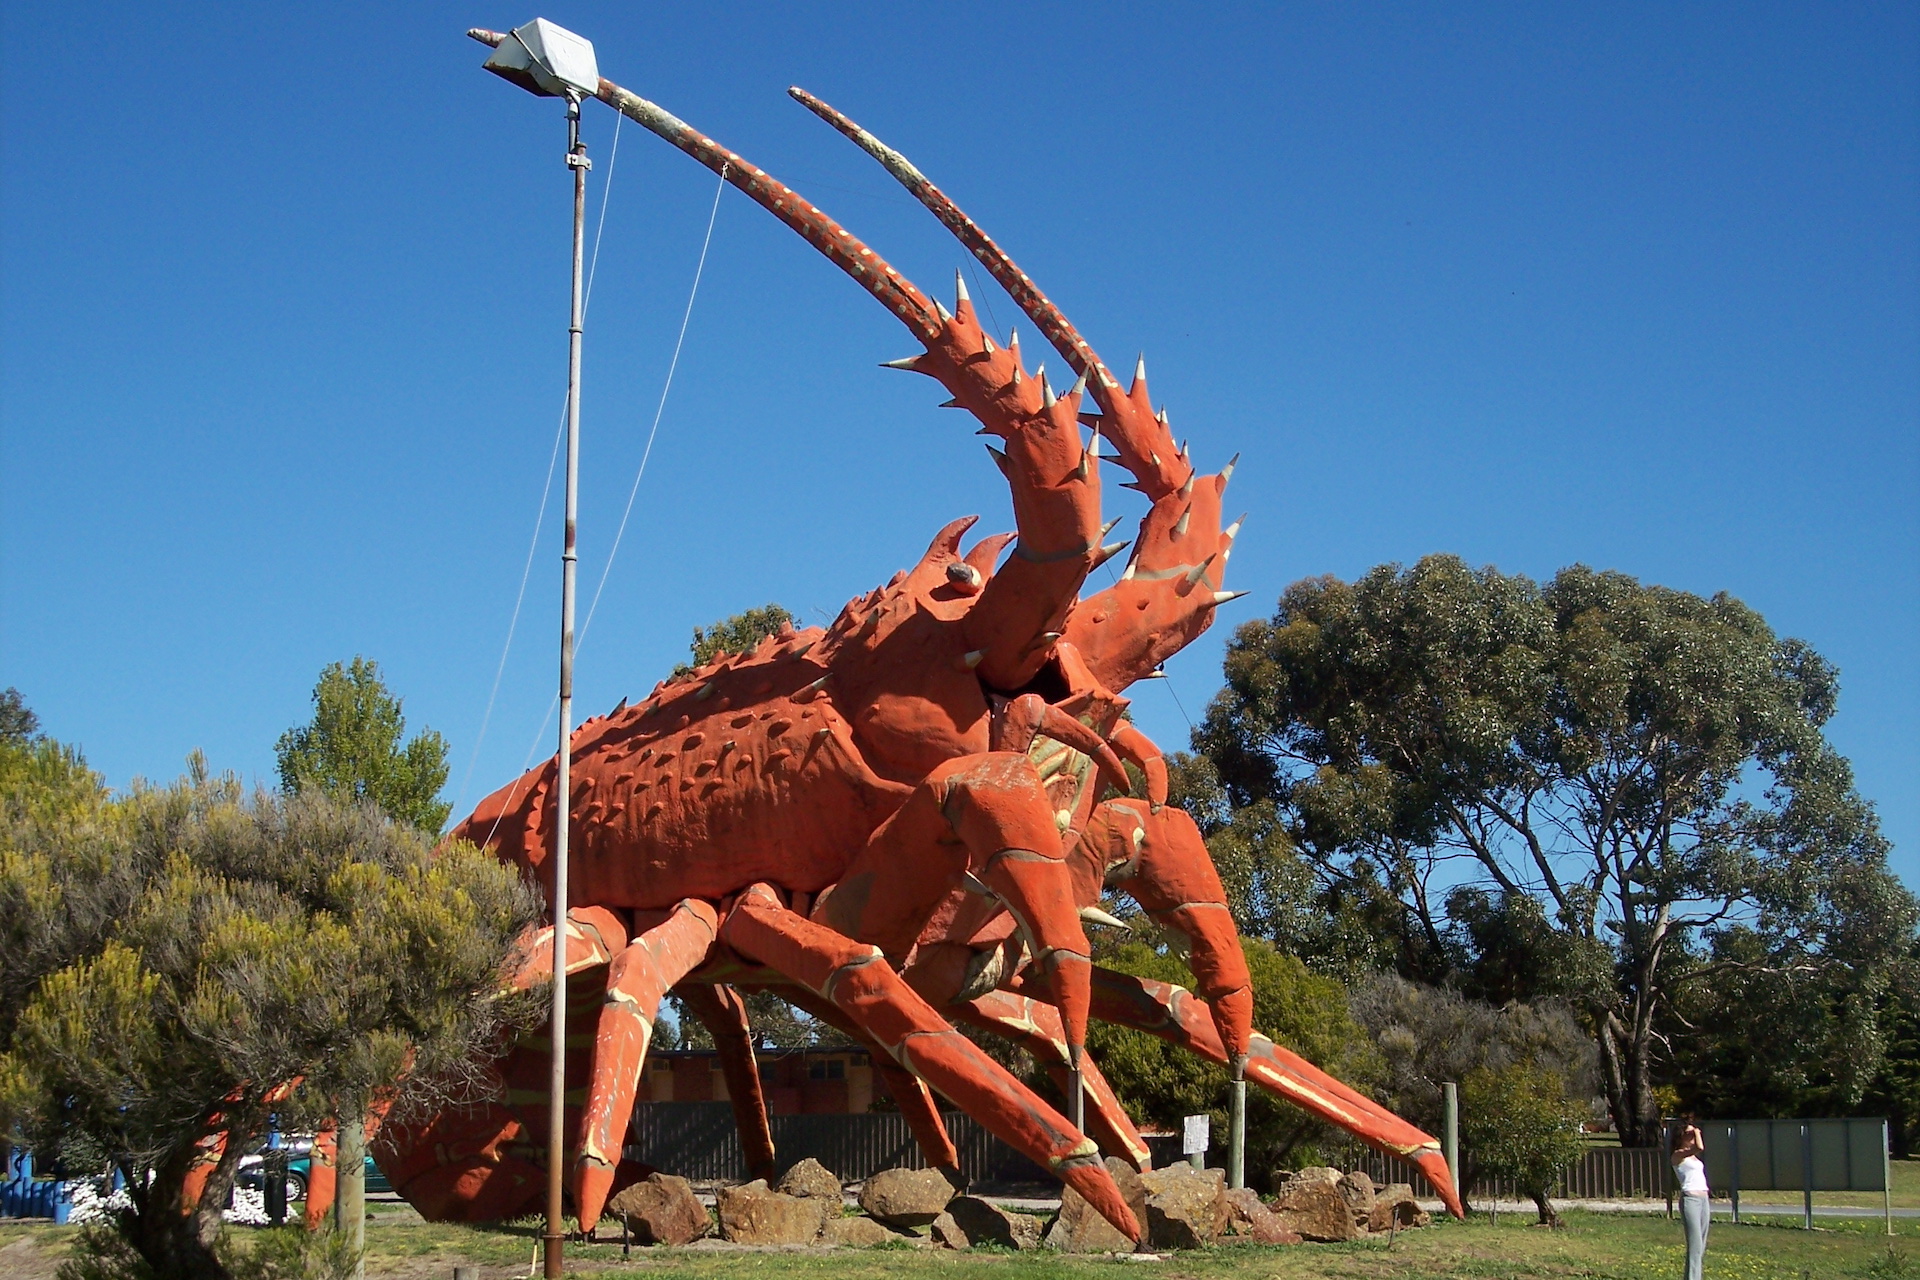 A person stands in front of a giant sculpture of a red lobster which towers over the person.